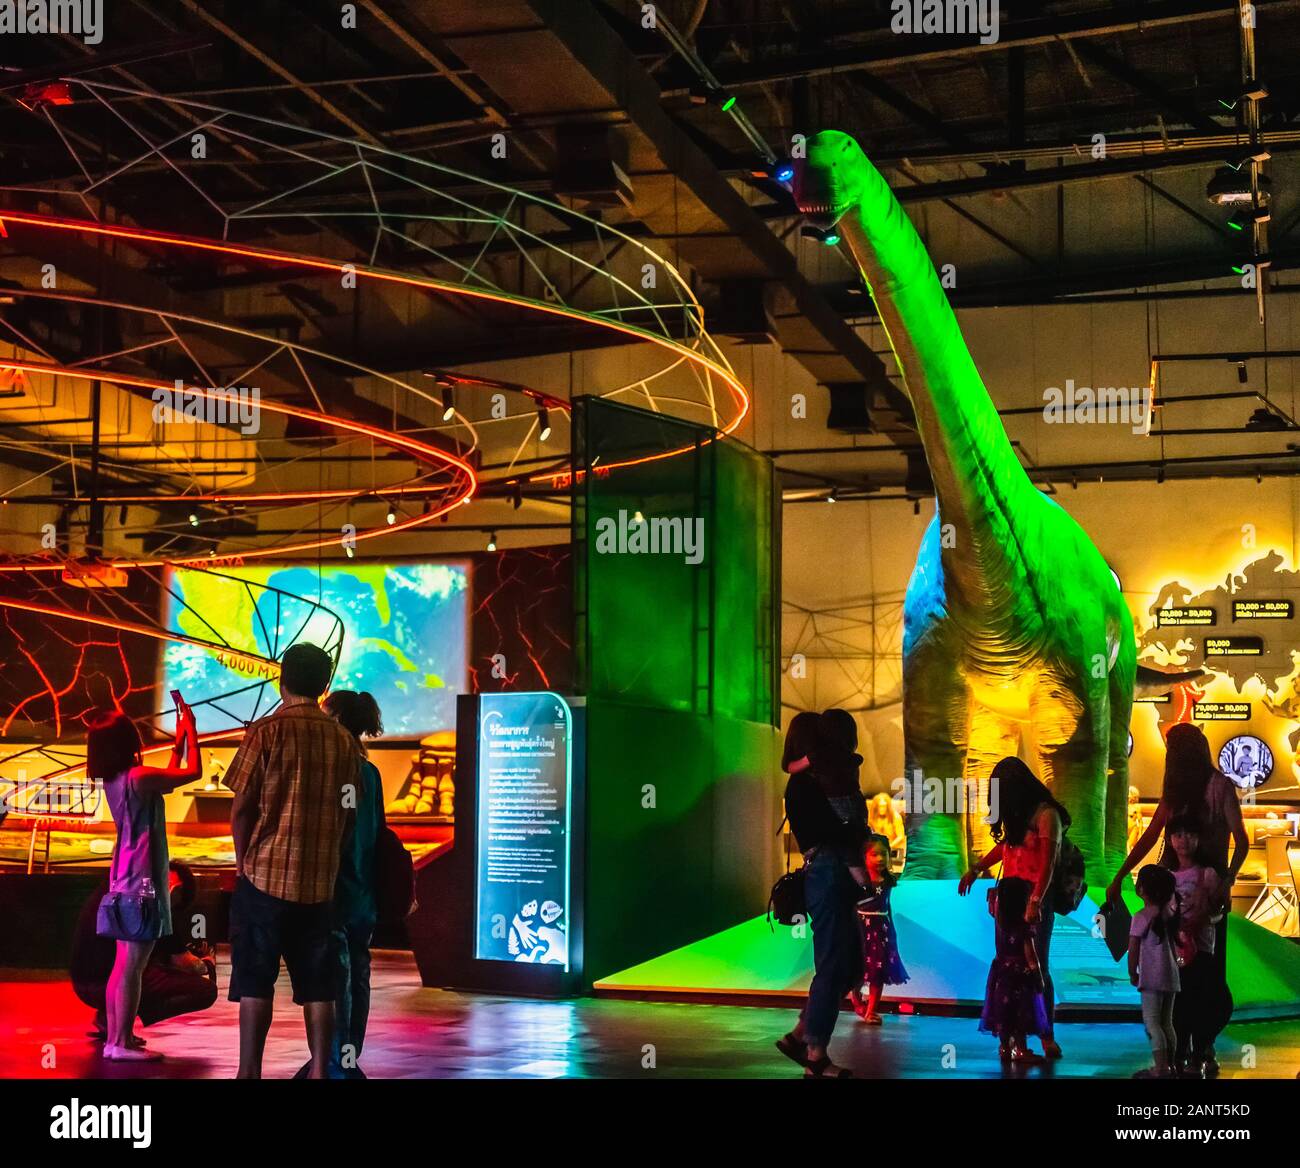 Pathum Thani, Thailand - January 19, 2020: Tourists see a big dinosaur at the National Science Museum (NSM), Thailand. The National Science Museum is Stock Photo